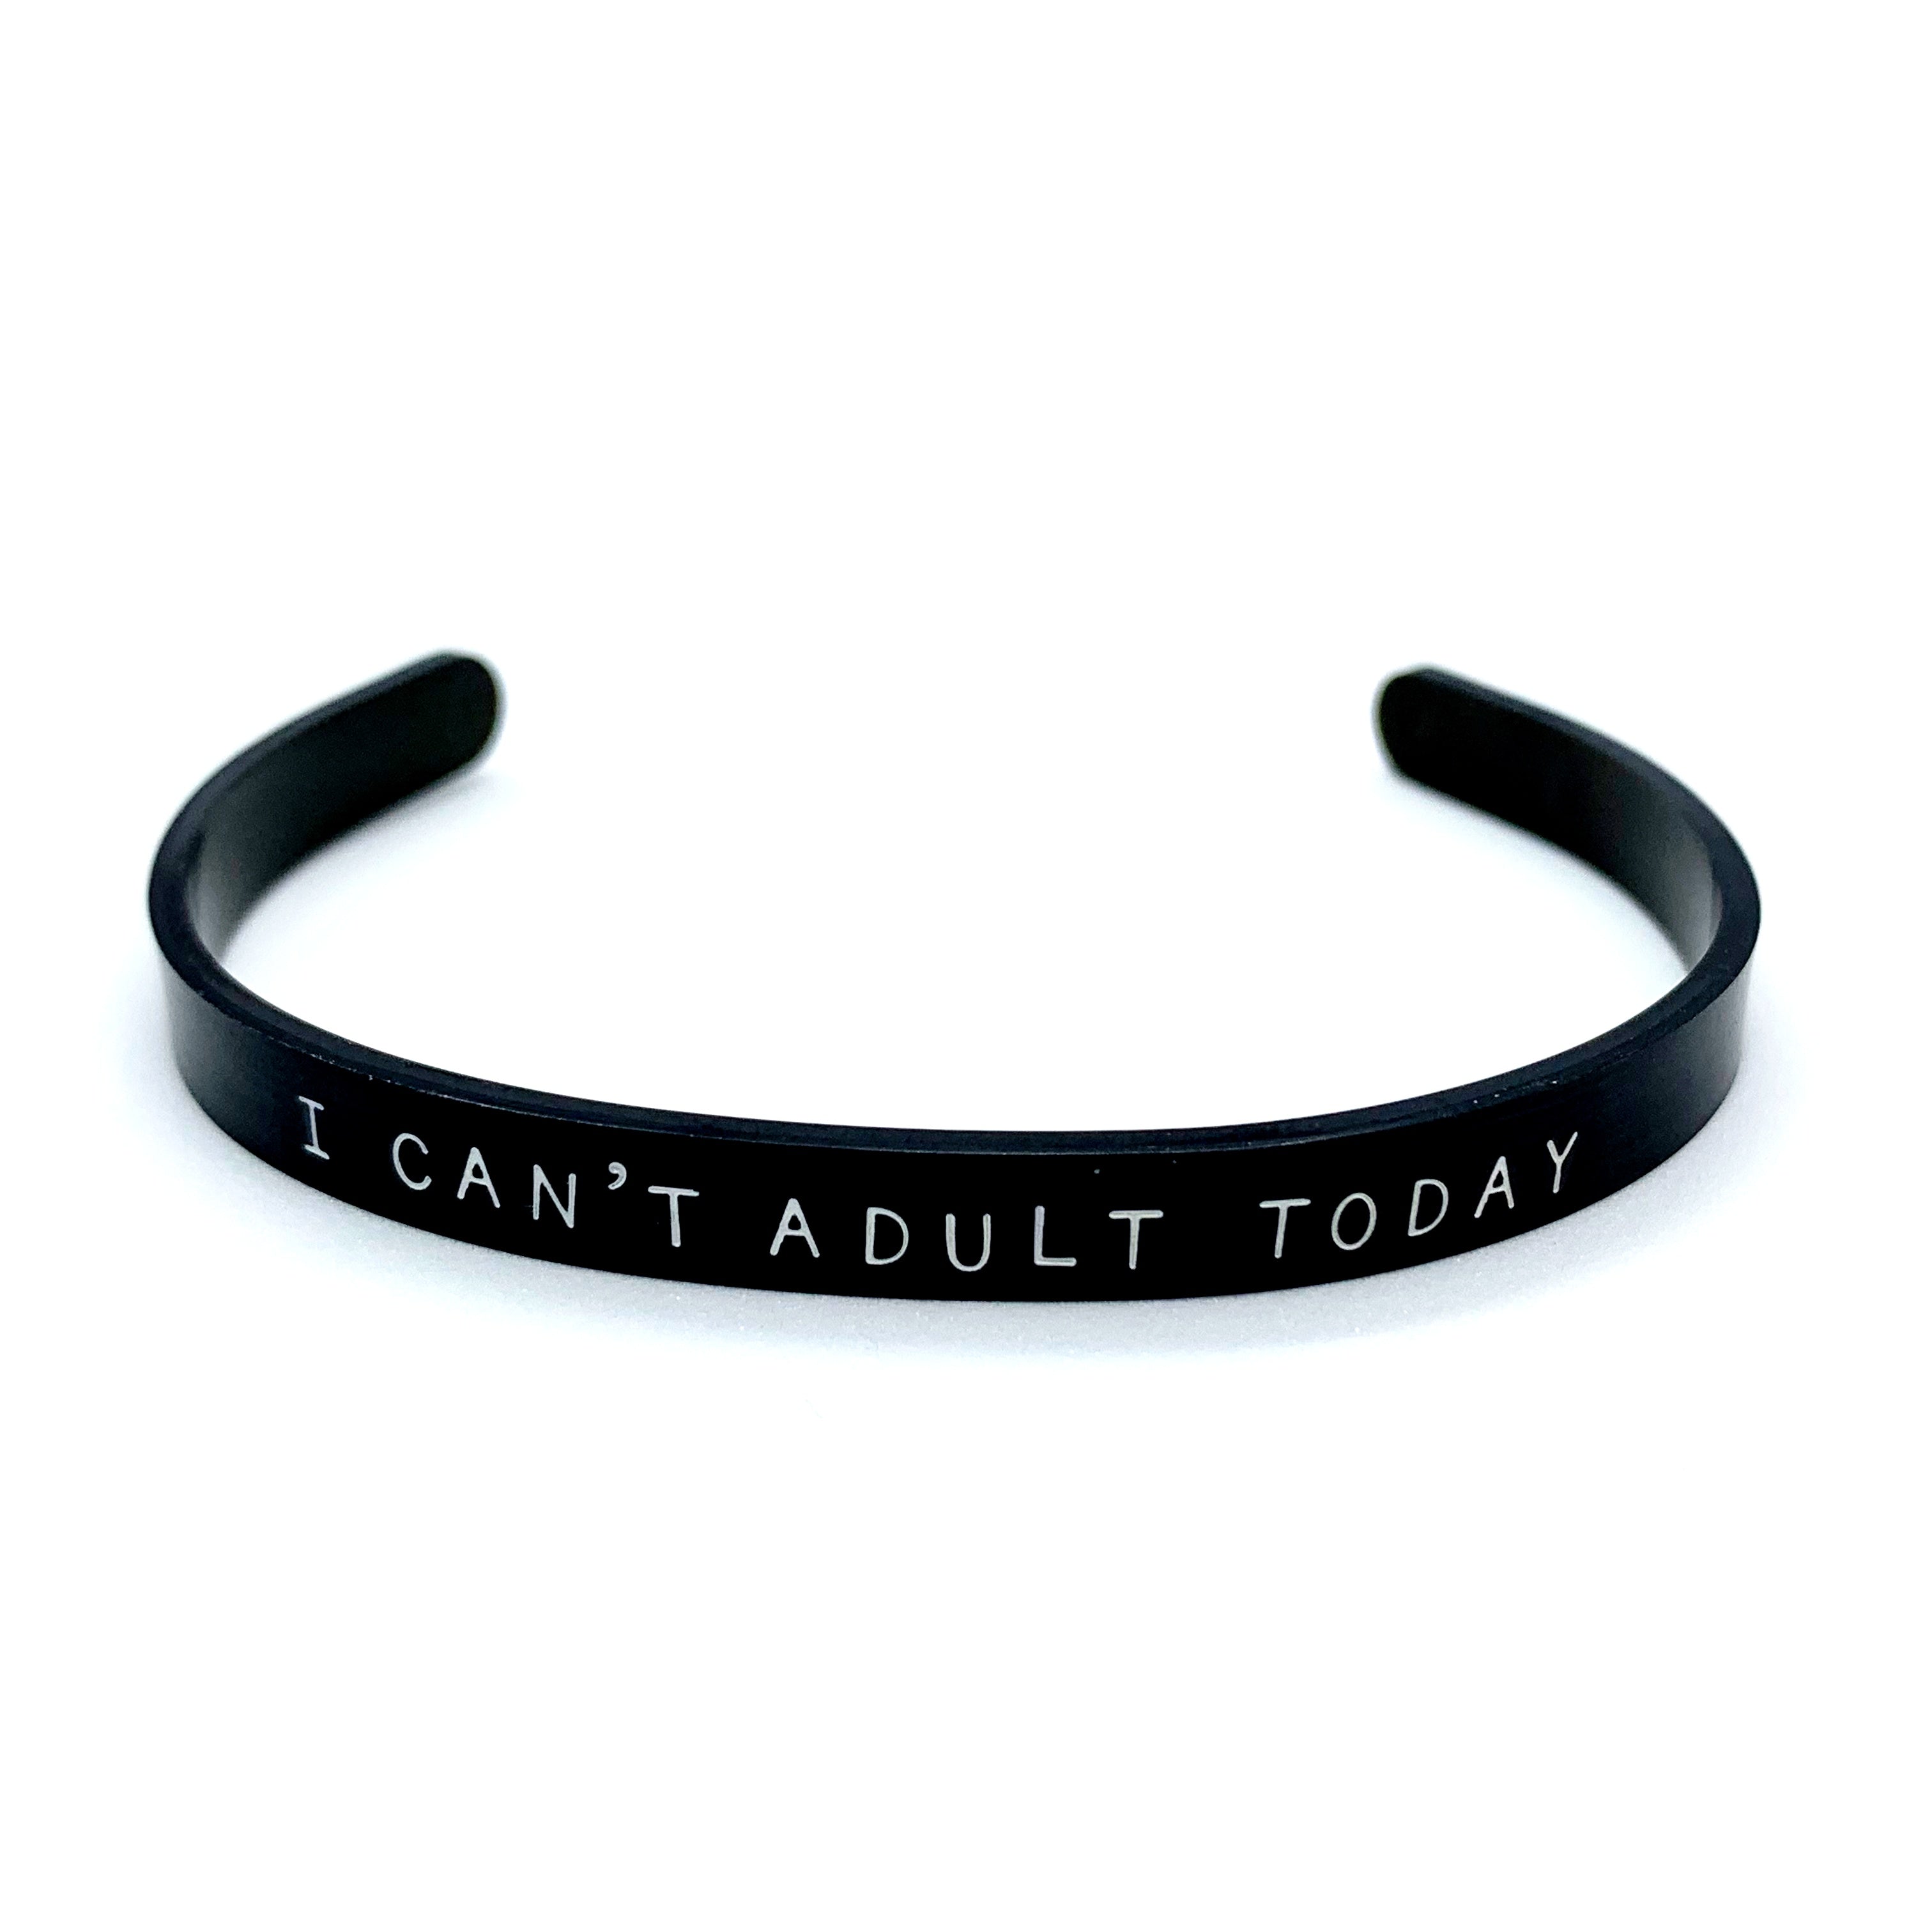 ¼ inch Stainless Steel Black Cuff - I Can't Adult Today